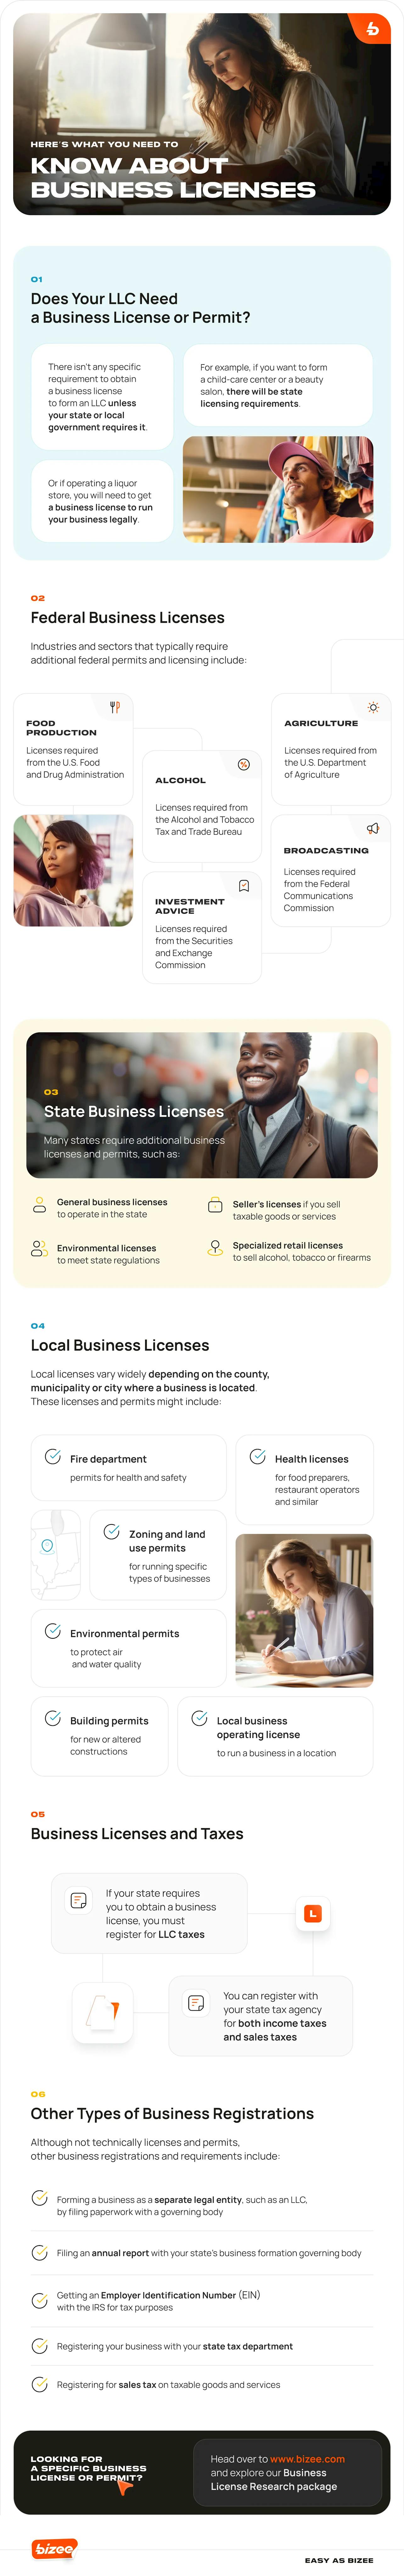 Here’s What You Need to Know About Business Licenses